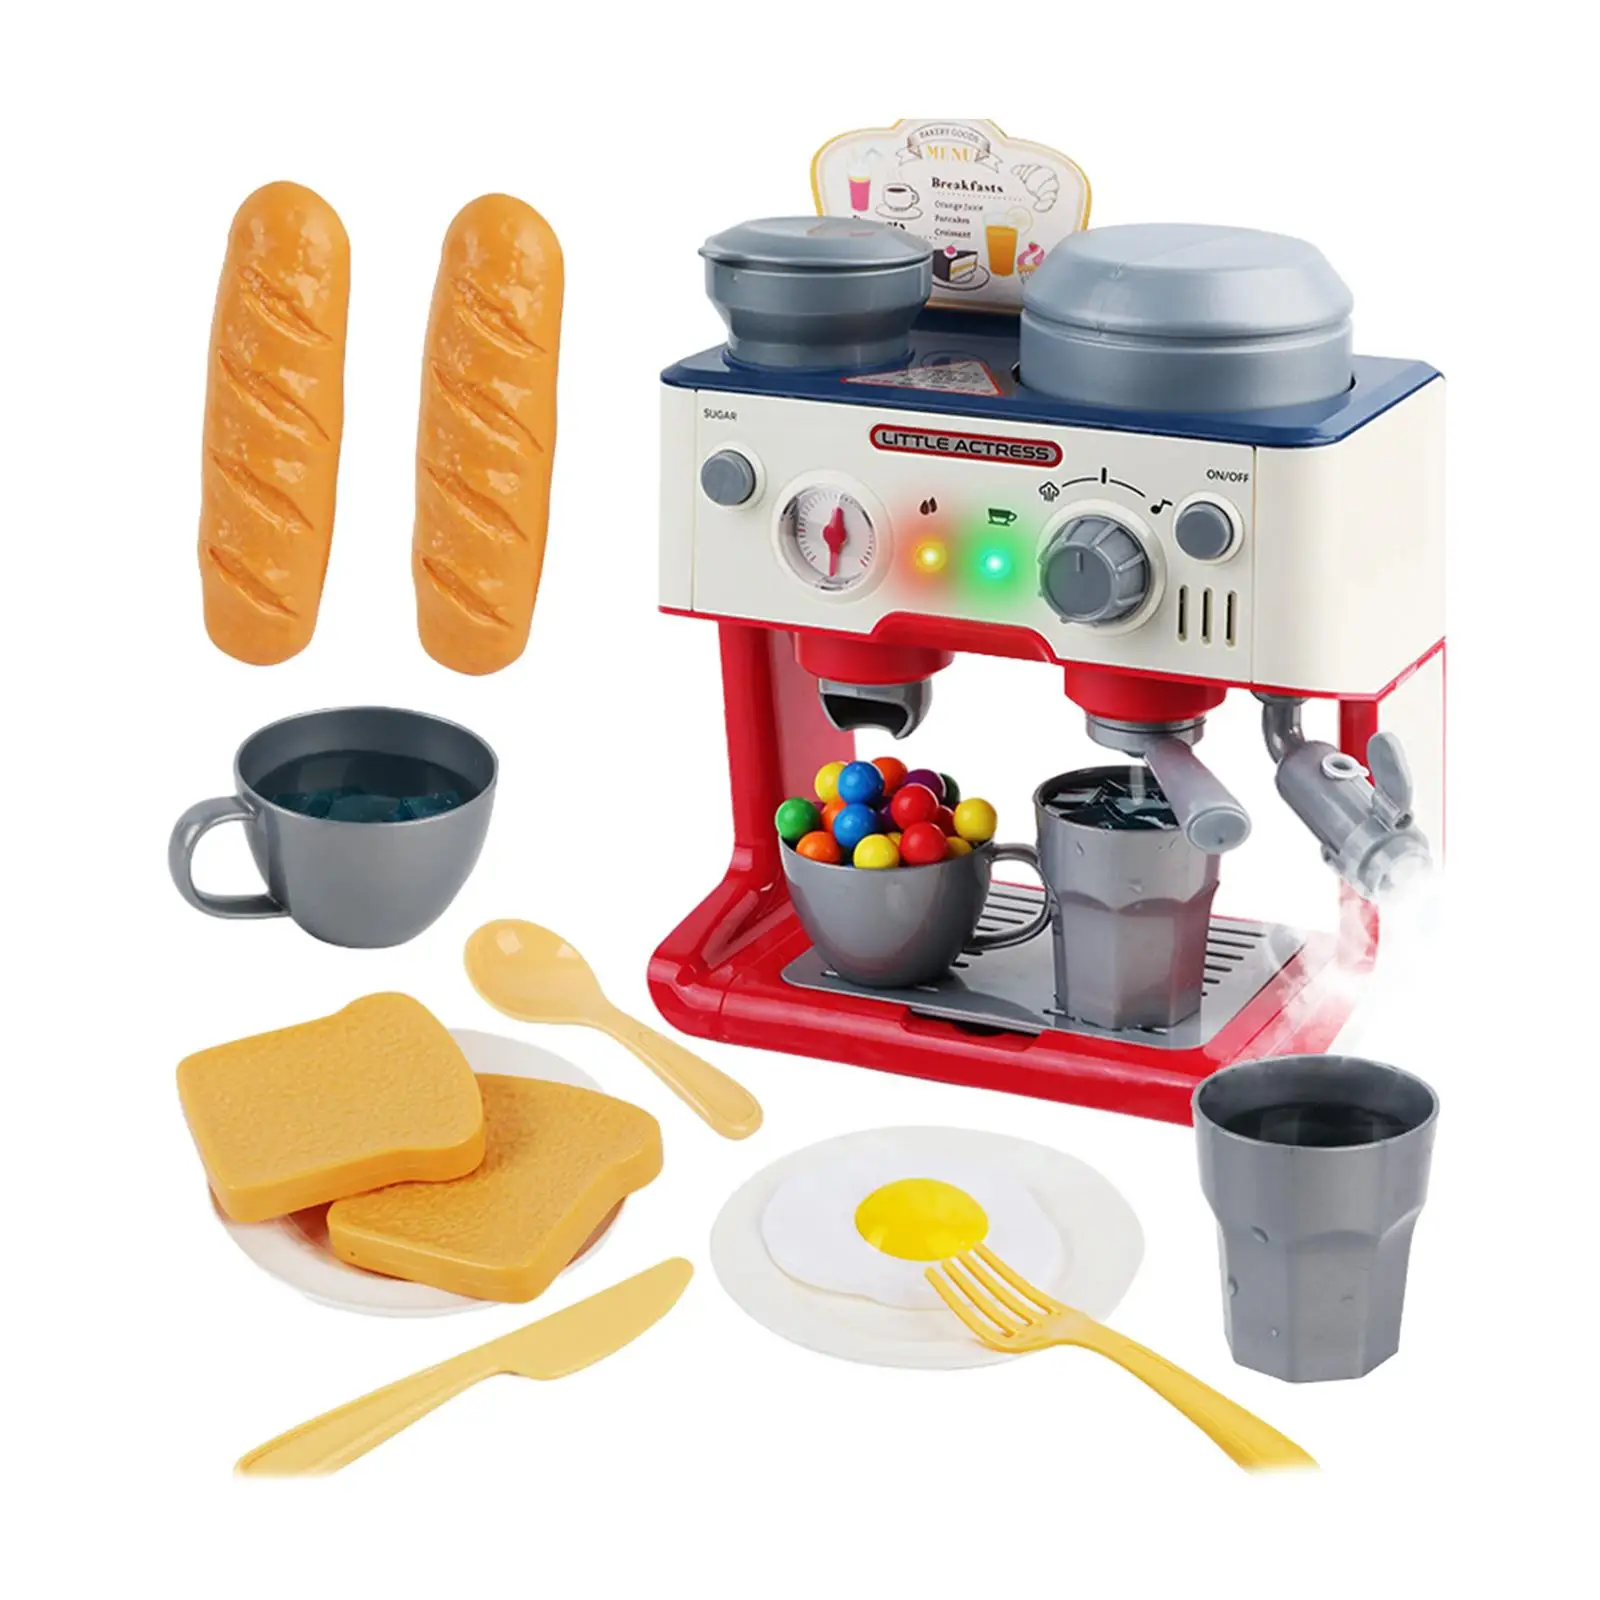 Simulation Coffee Maker Toys Pretend Cooking with Lights Upgraded Toy Coffee Set for Children Girls Kids Boys Birthday Gifts